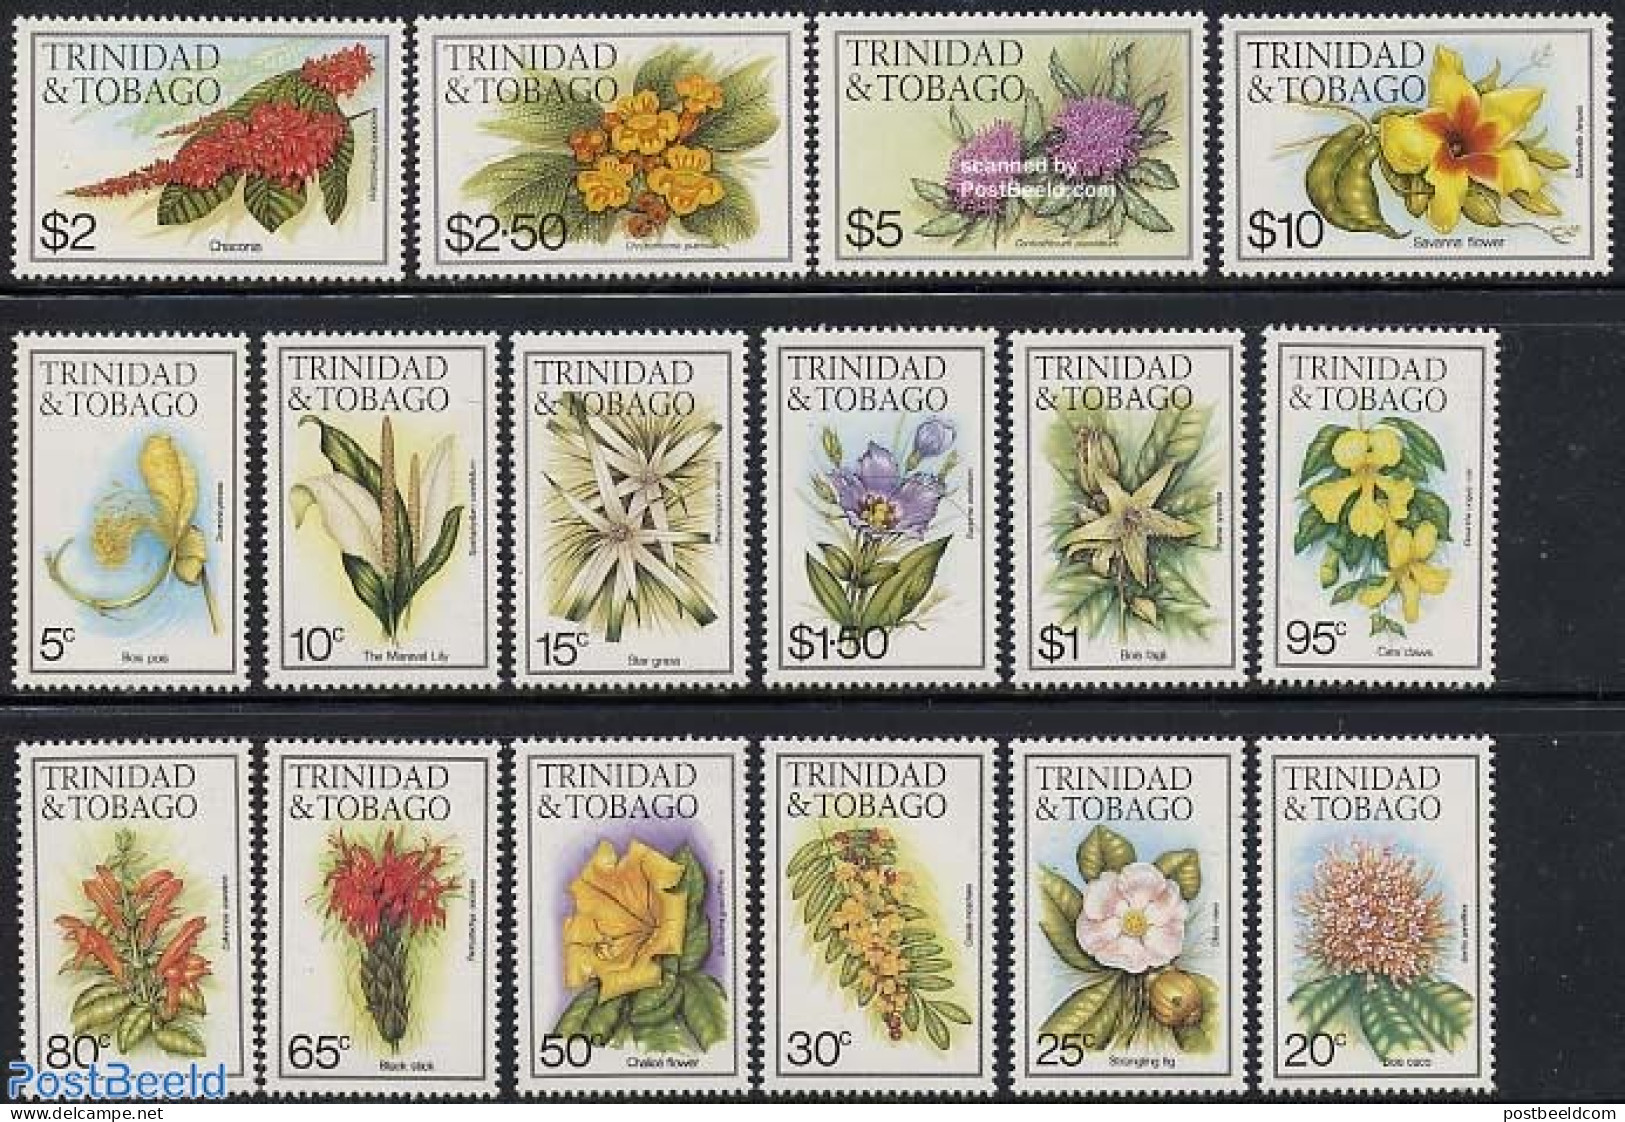 Trinidad & Tobago 1983 Definitives, Flowers 16v (without Year), Mint NH, Nature - Flowers & Plants - Trindad & Tobago (1962-...)